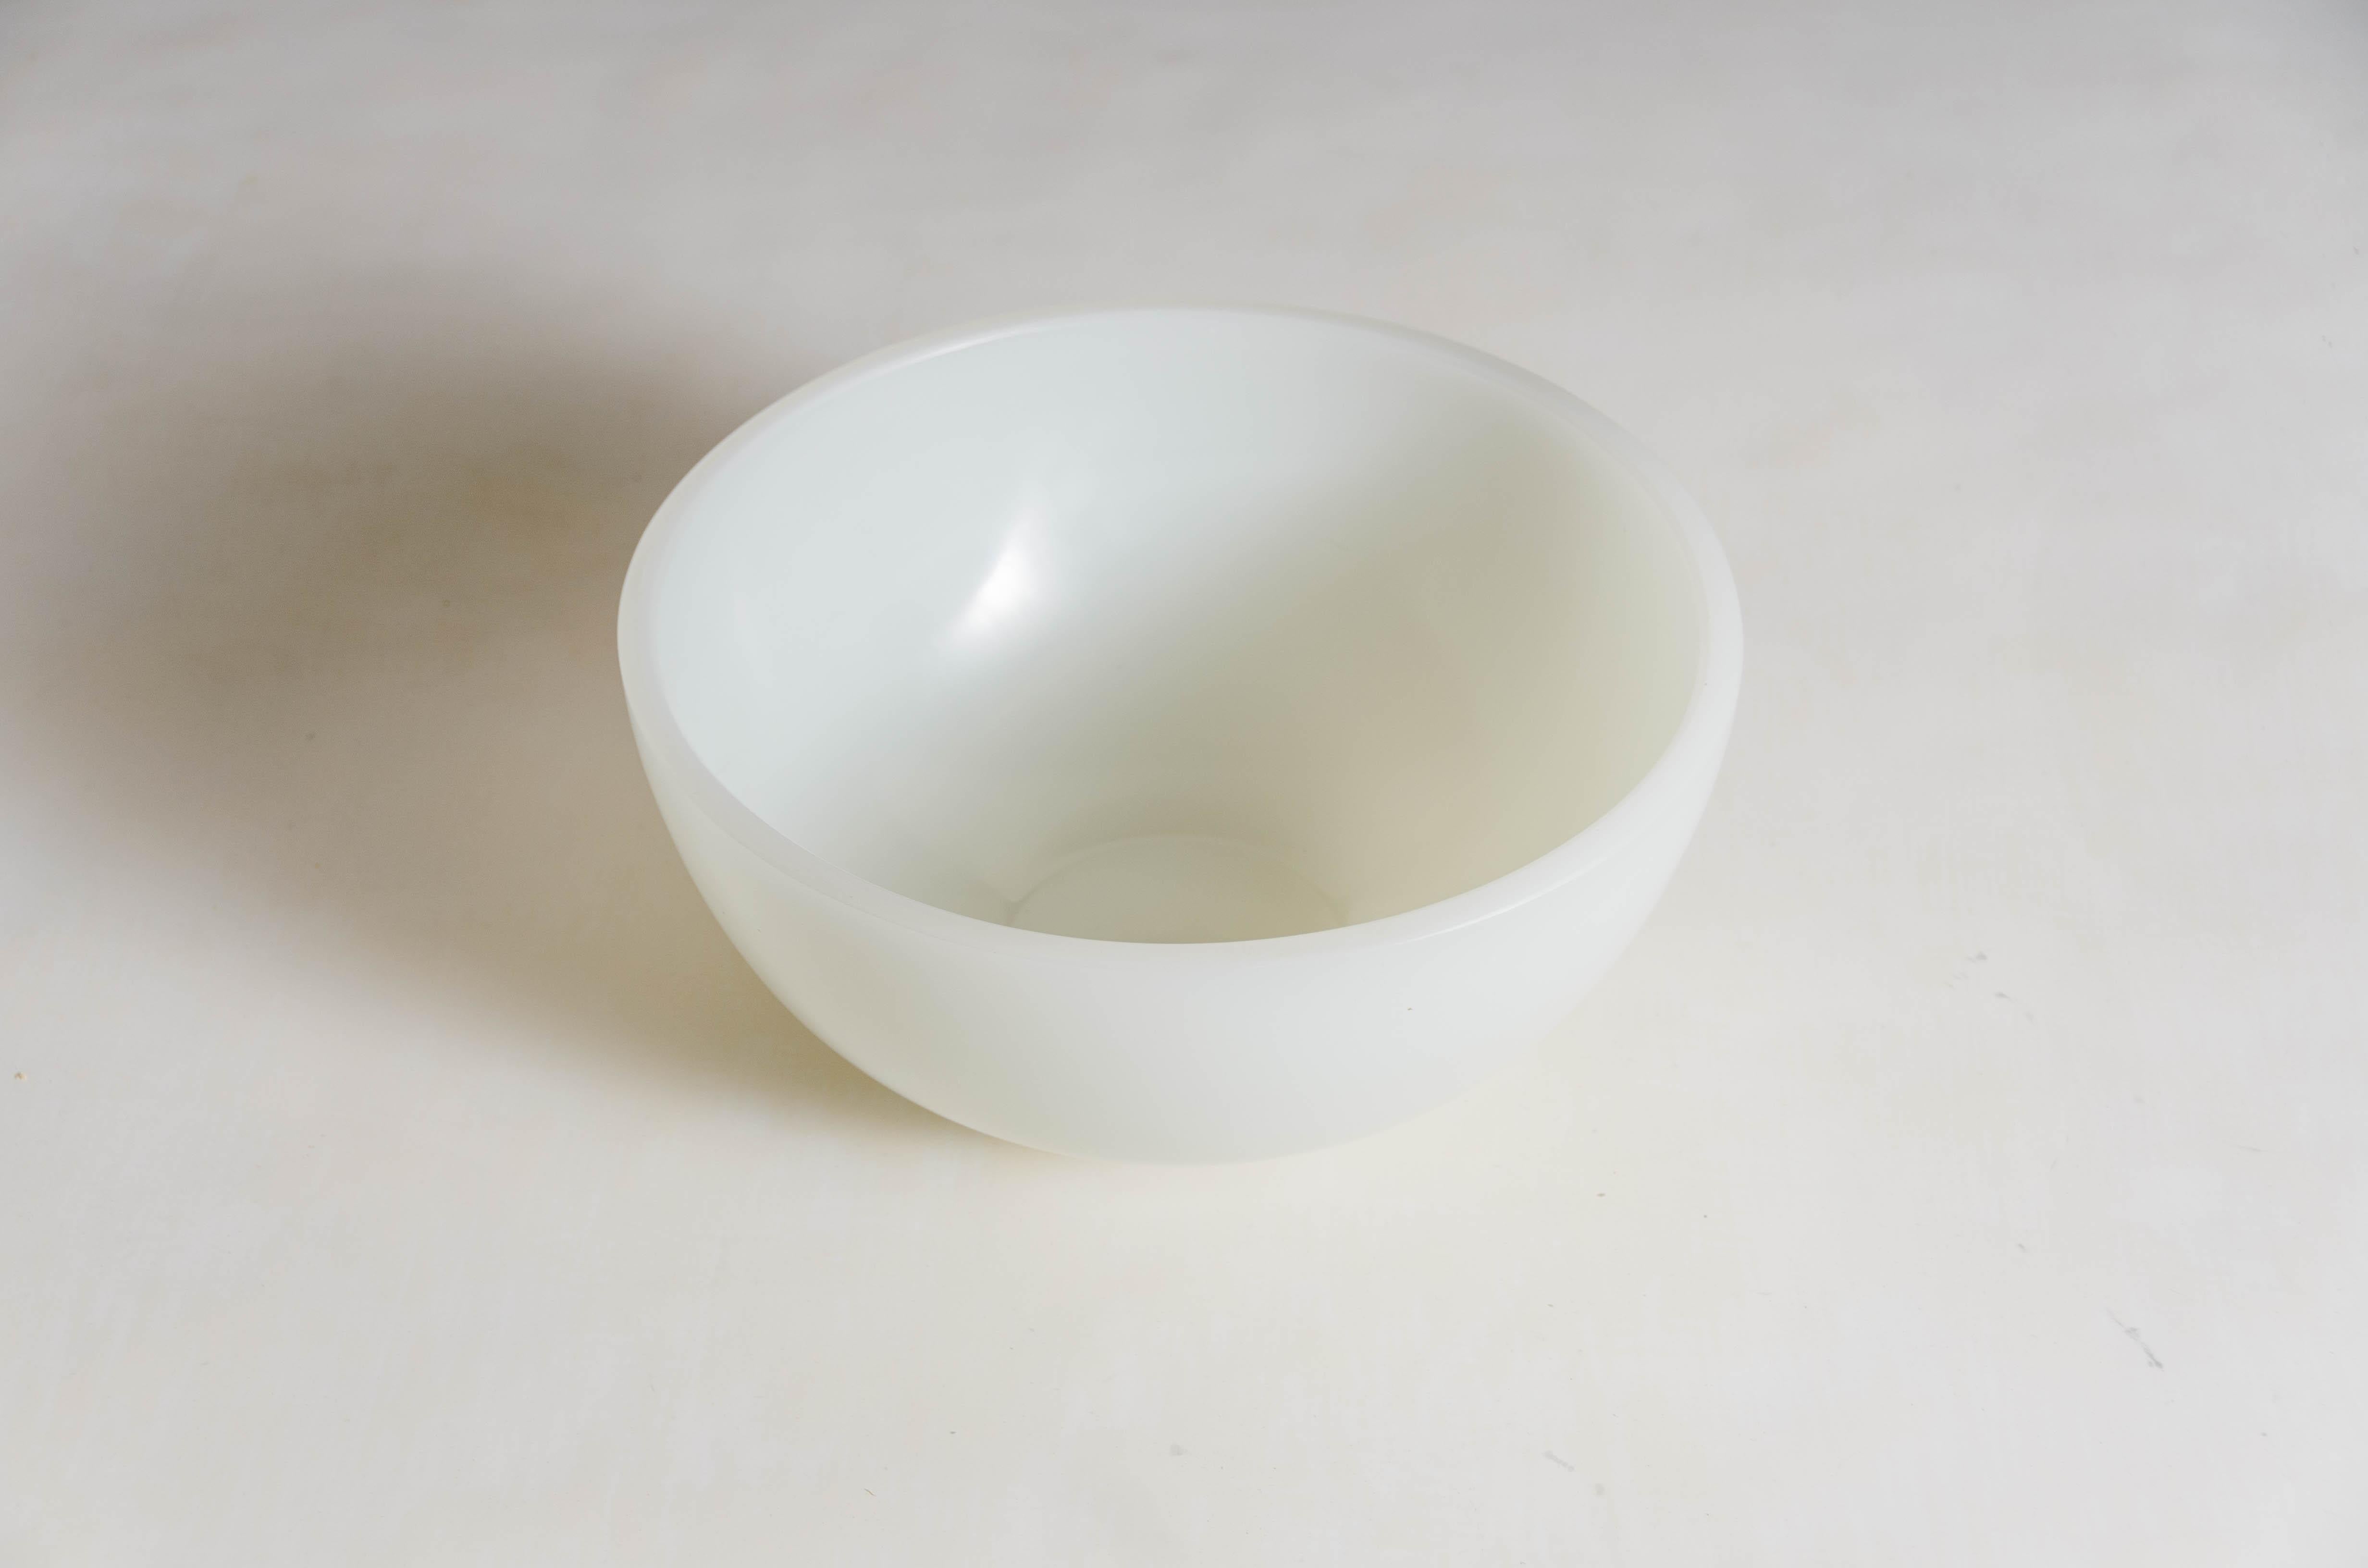 Glass bowl
Bai Jade 
Peking glass
Hand blown
Hand carved
Limited edition

Peking glass refers to the high-quality glass art produced by the imperial and commercial workshops in Beijing during the Ching Dynasty, China 1644-1911. Since then,